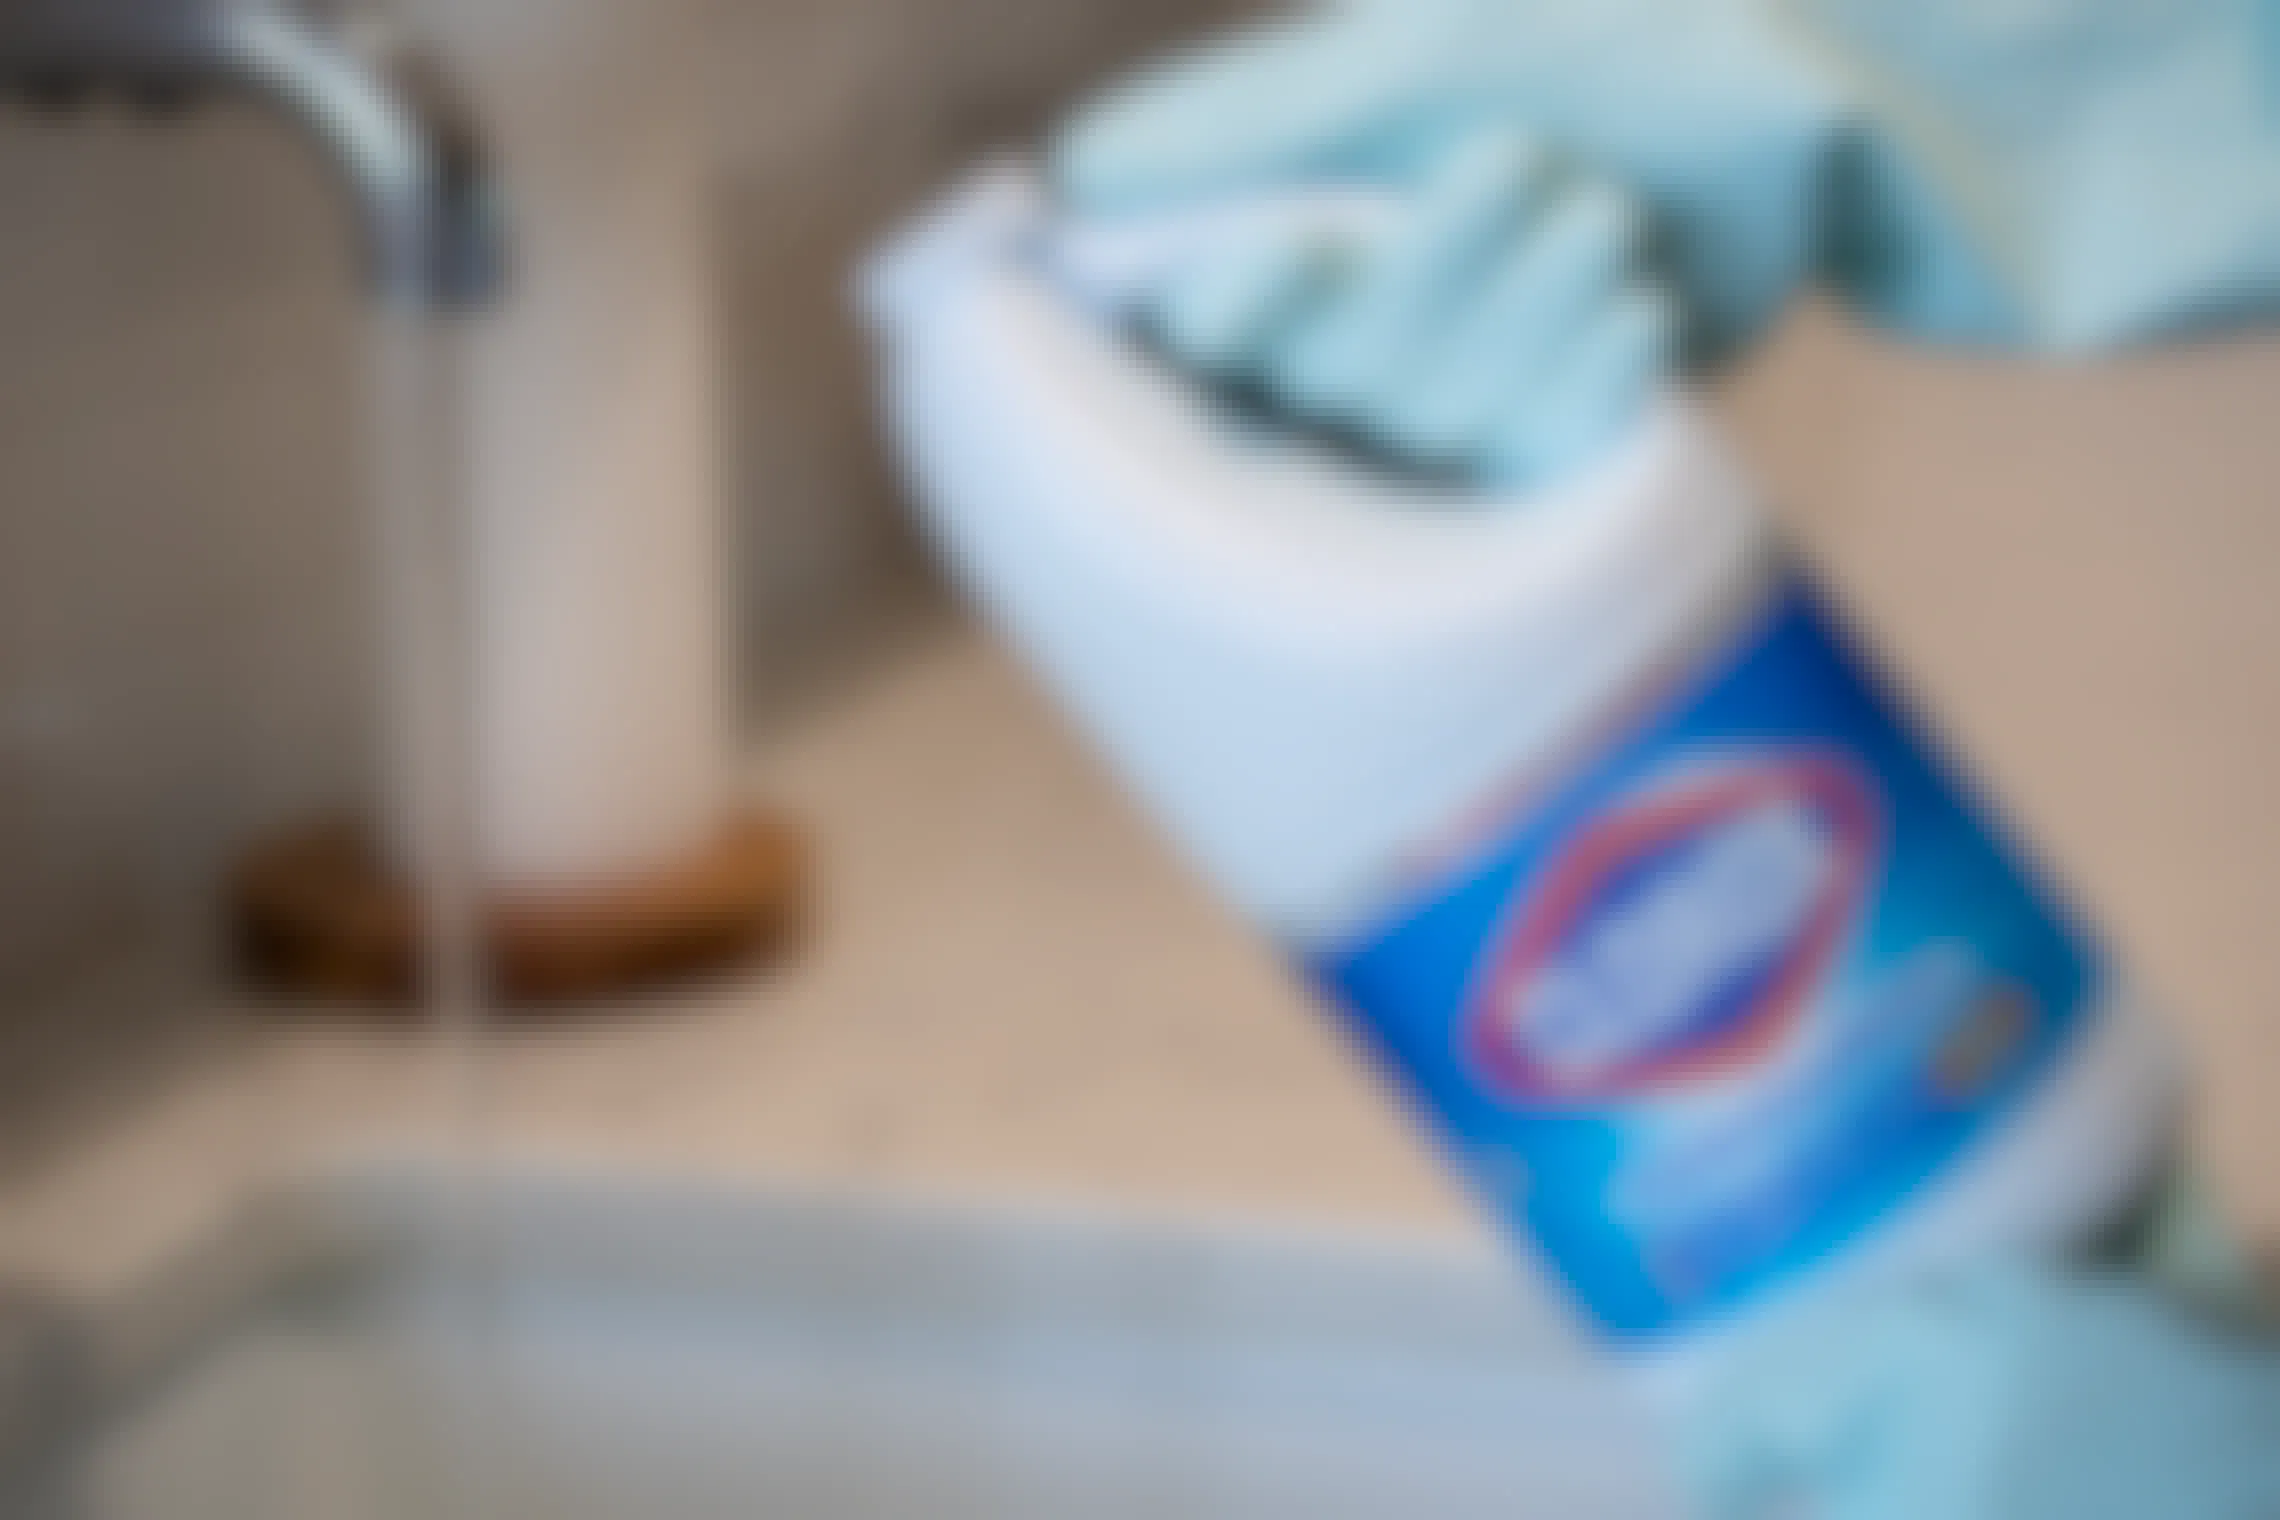 A person holding a bottle of Clorox bleach next to a sink with the tap running while wearing rubber dish gloves.